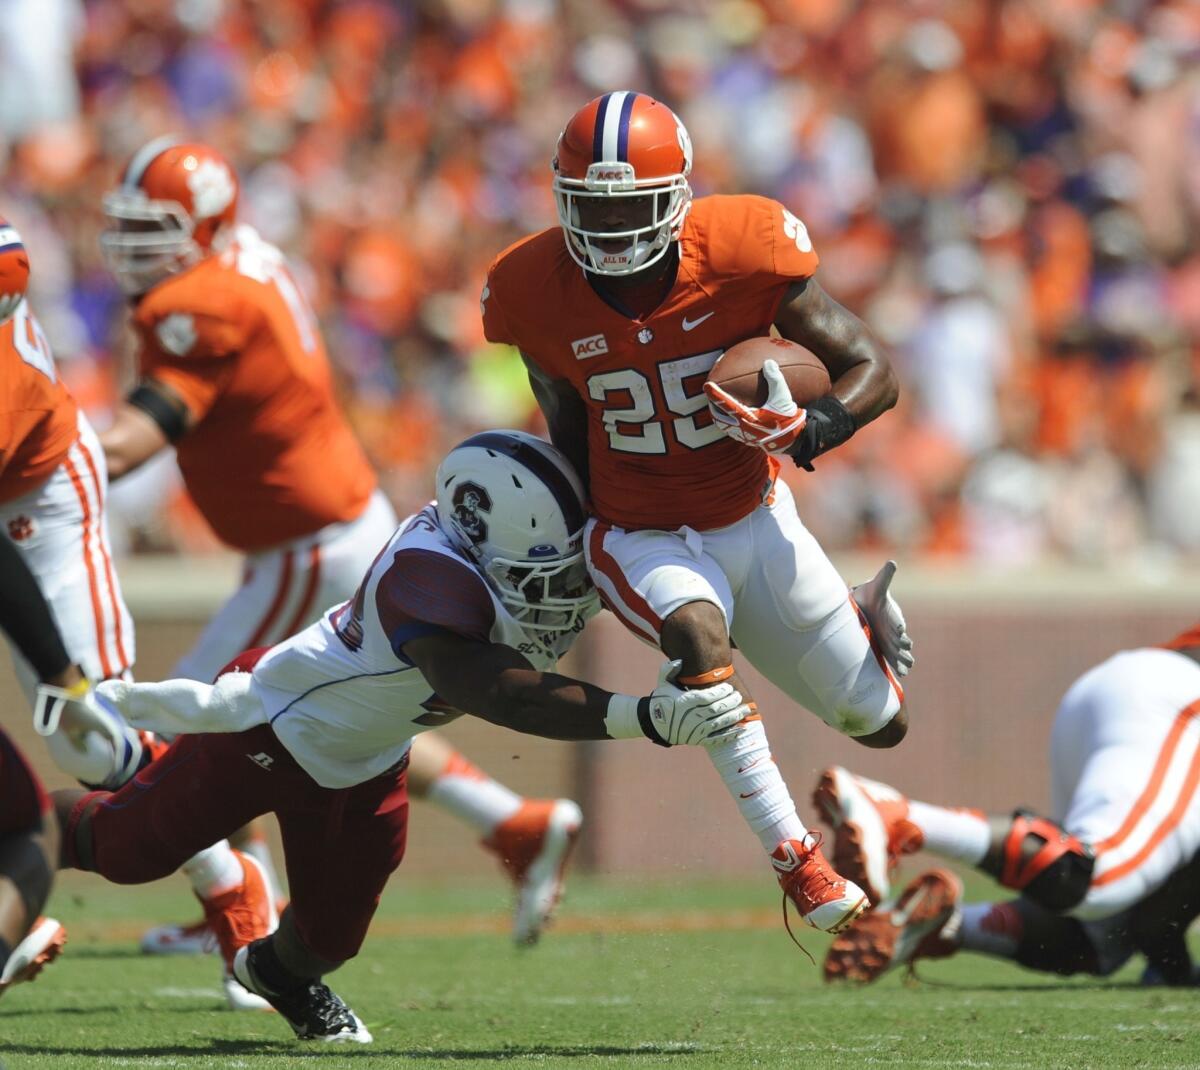 Clemson running back Roderick McDowell breaks a tackle attempt by South Carolina's Joe Thomas during the first half of the Tigers' win Saturday.